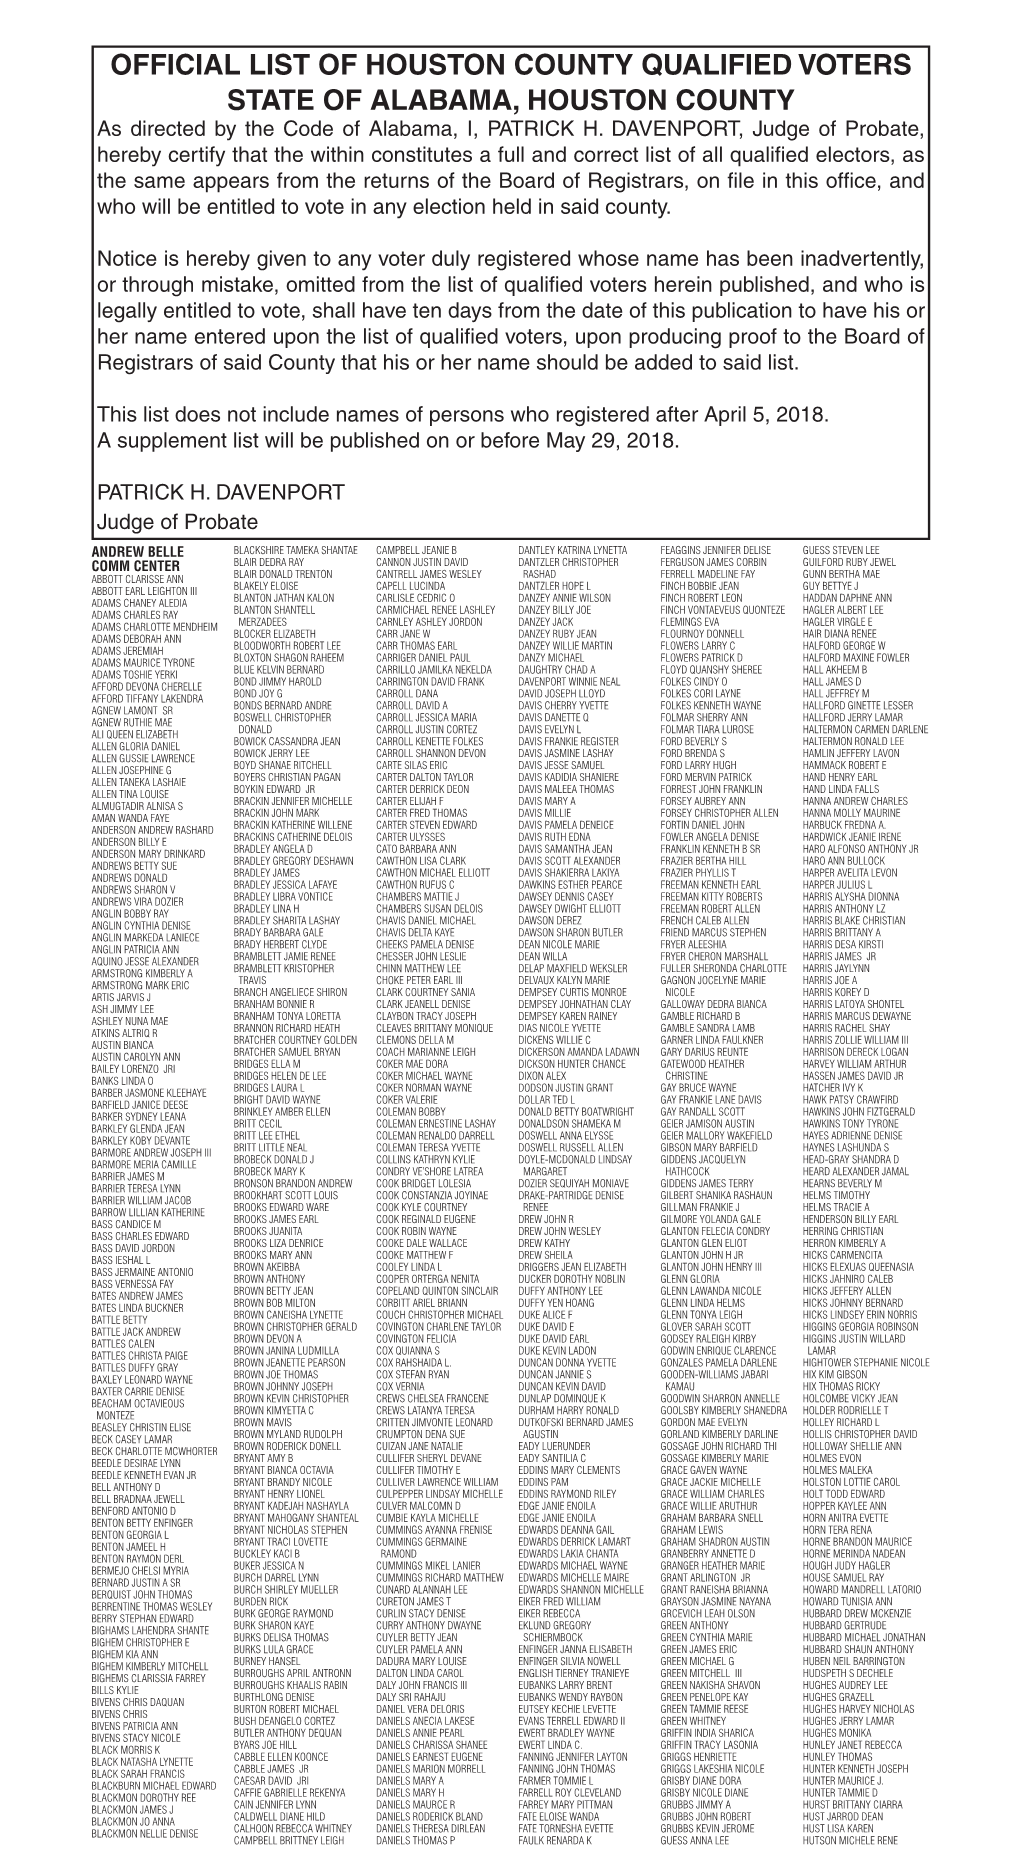 OFFICIAL LIST of HOUSTON COUNTY QUALIFIED VOTERS STATE of ALABAMA, HOUSTON COUNTY As Directed by the Code of Alabama, I, PATRICK H